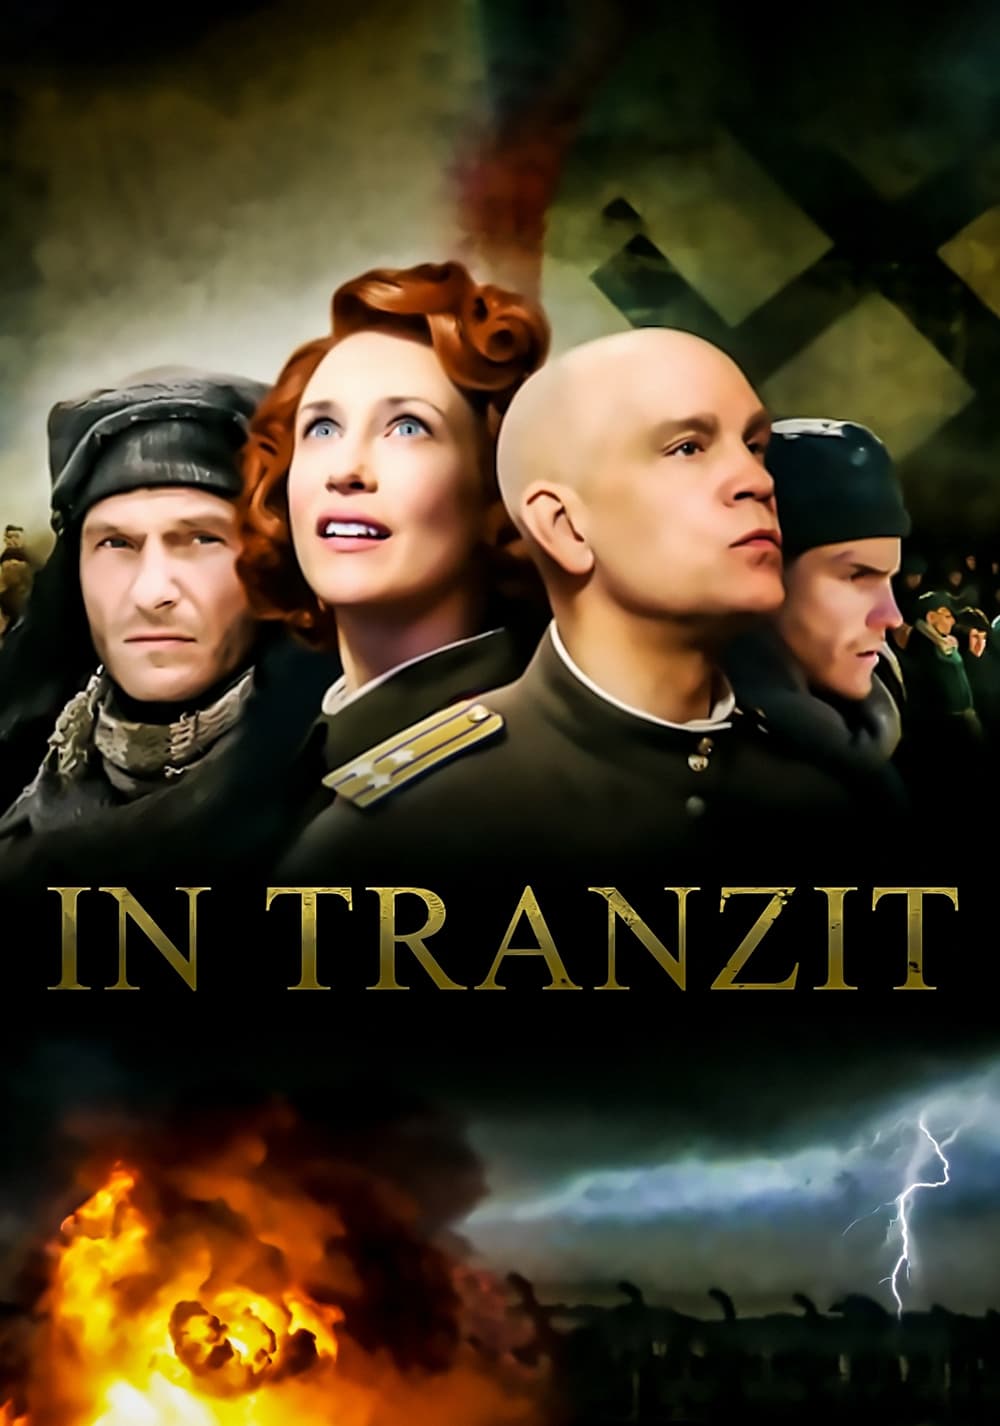 In Tranzit streaming sur zone telechargement